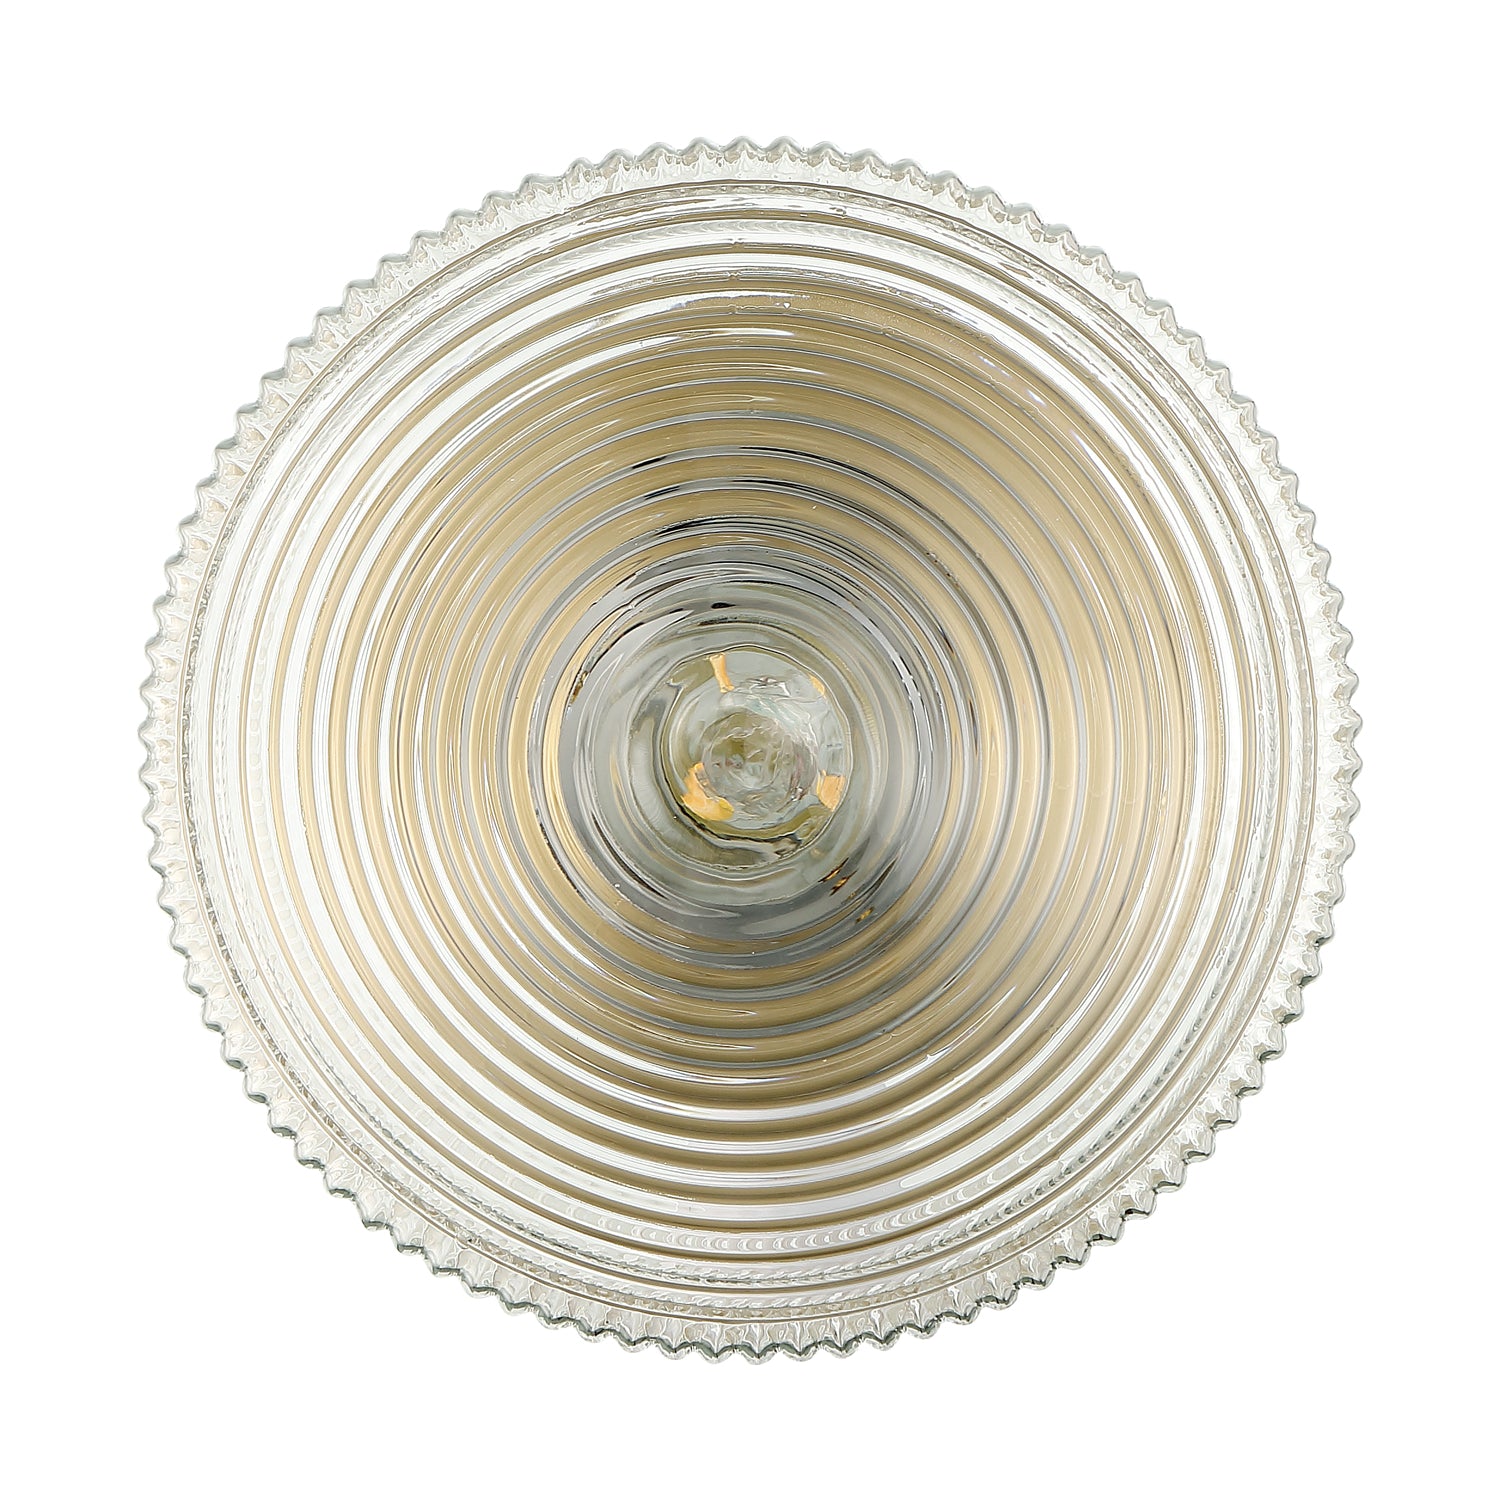 Jules Glass Flush Mount, Satin Brass with Clear Glass